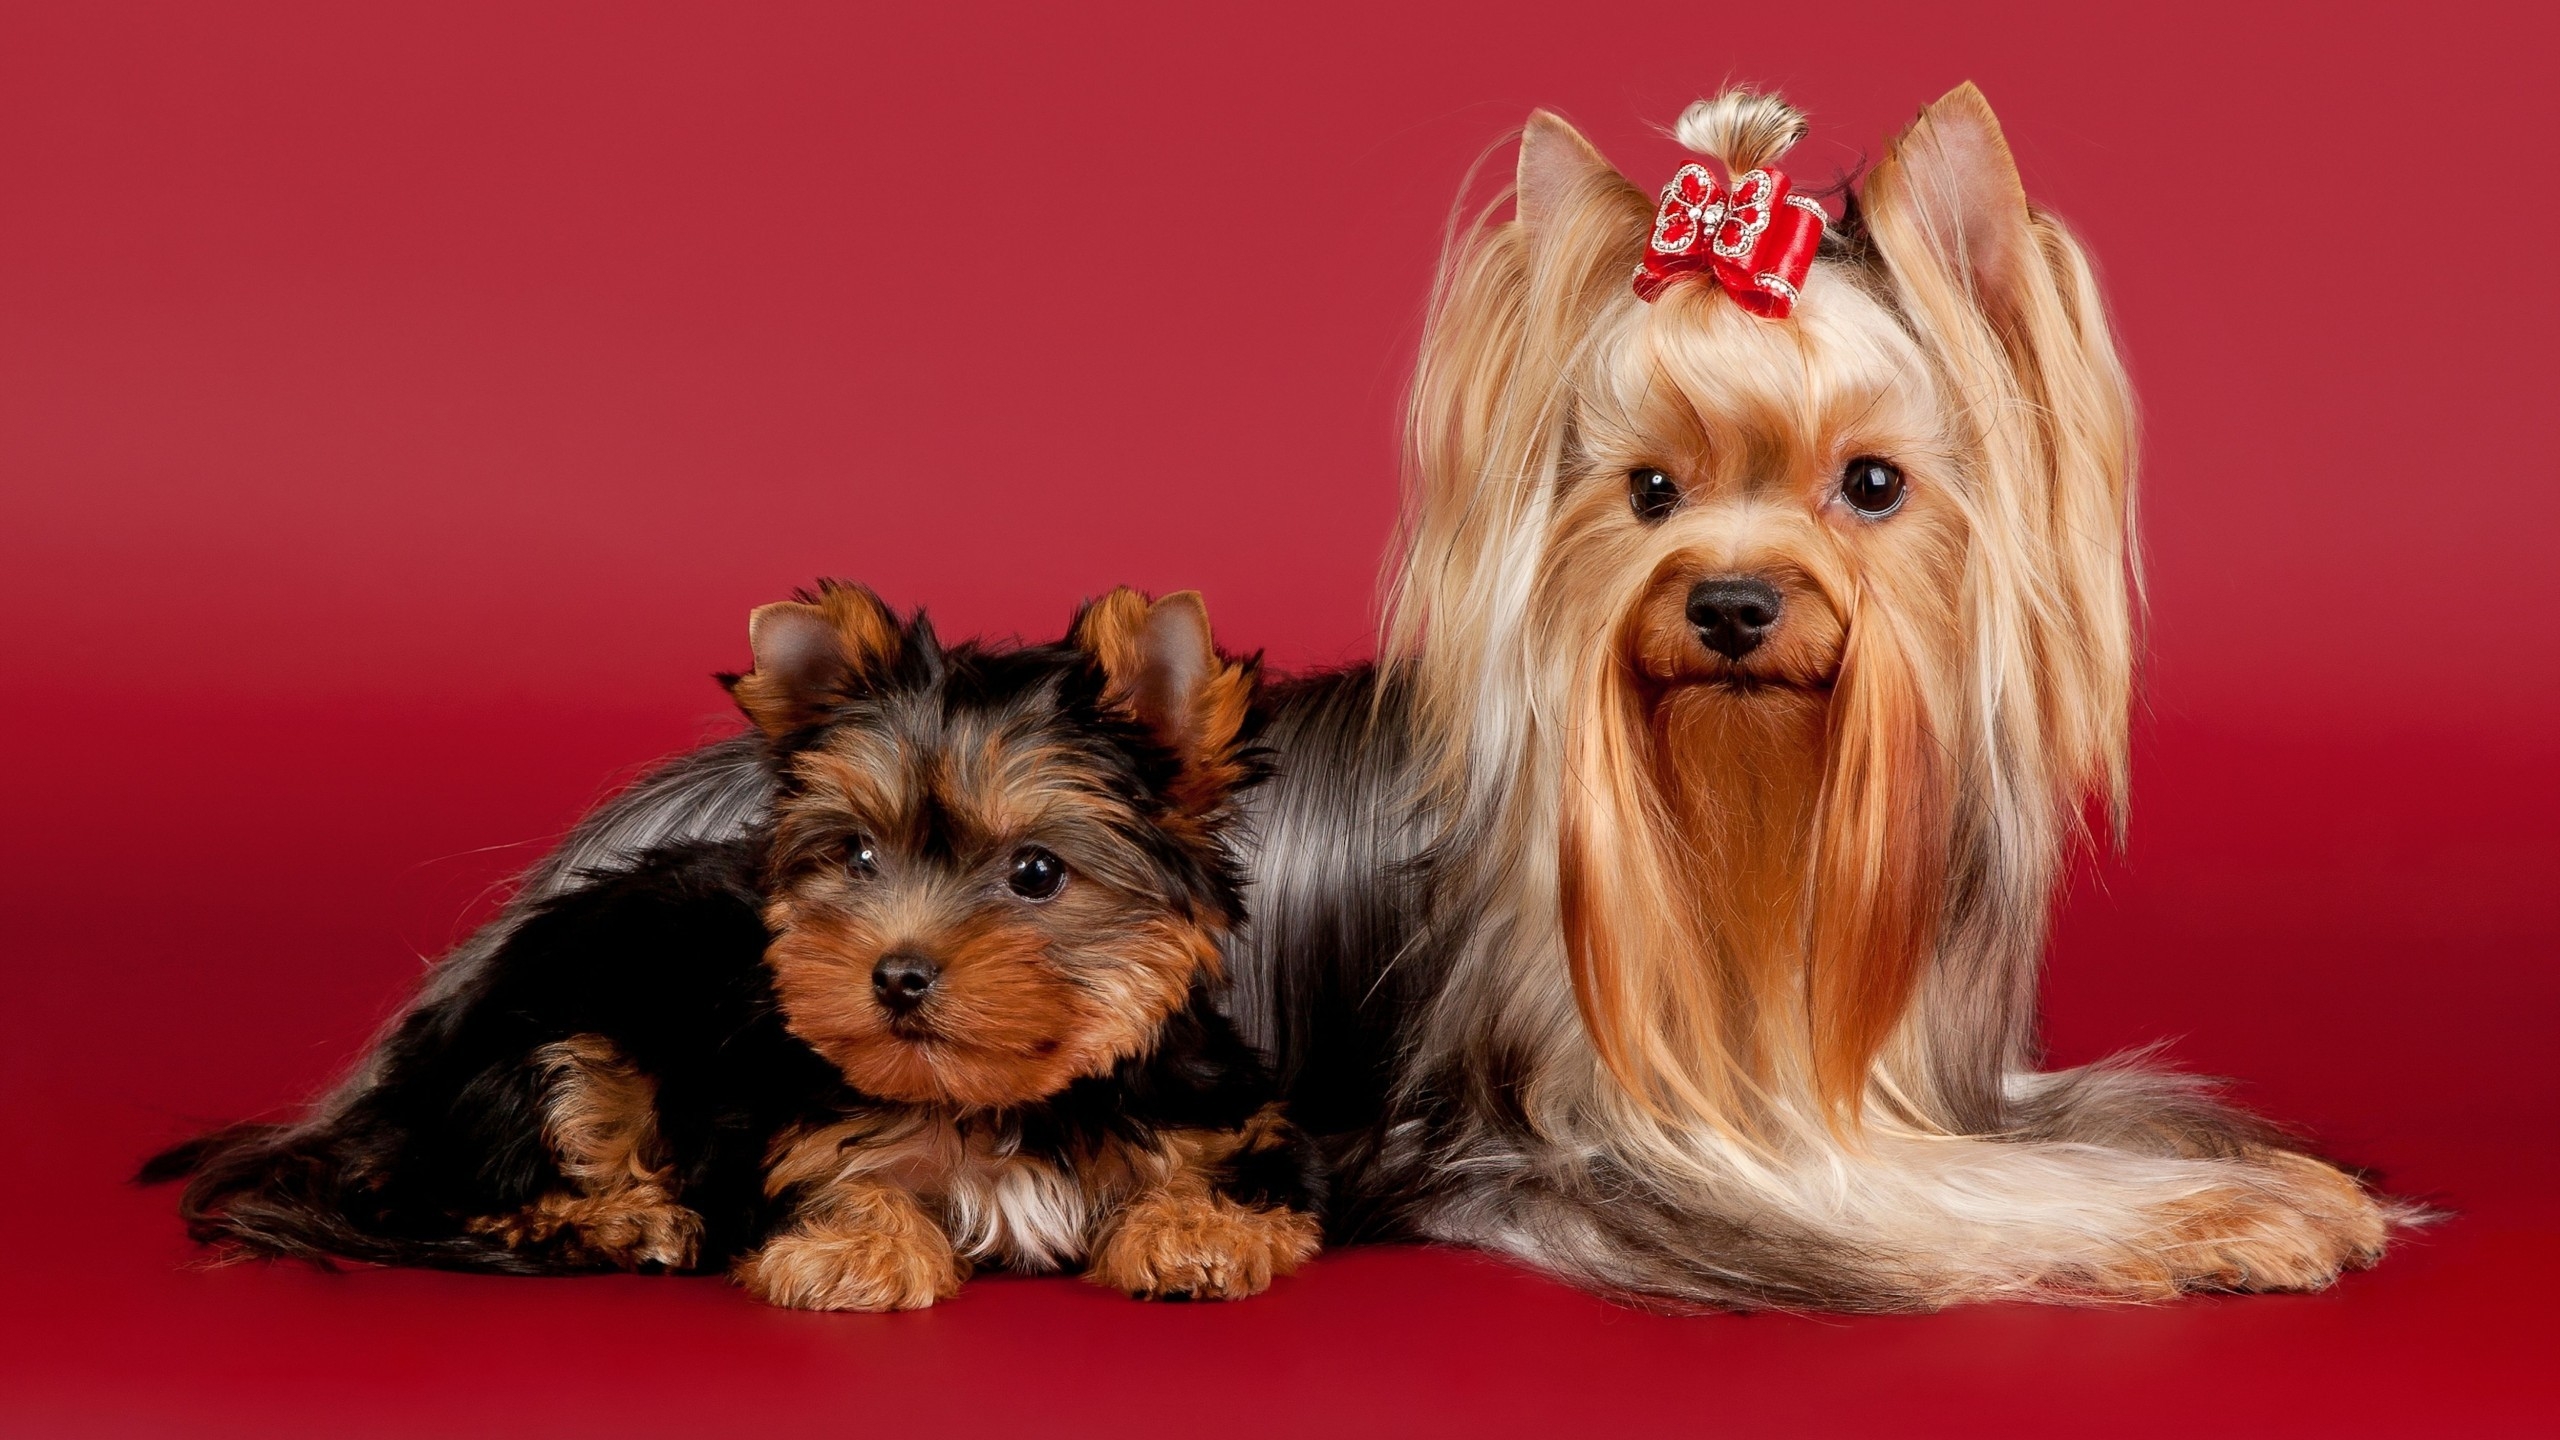 2 Cute Dogs for 2560x1440 HDTV resolution